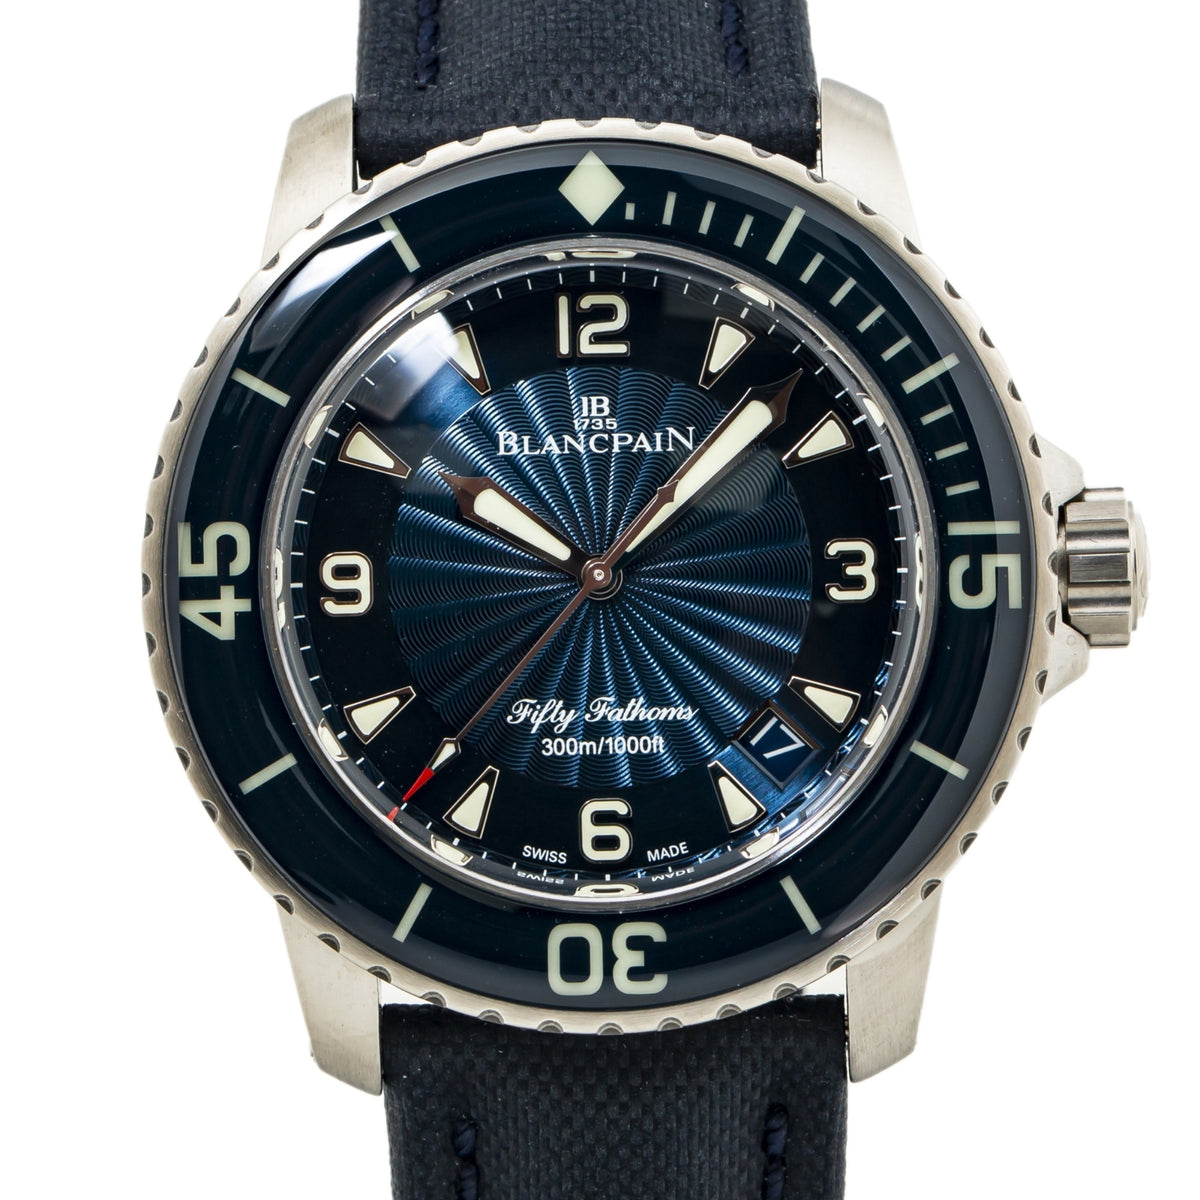 Blancpain Fifty Fathom 50150D-1140-52B Blue Dial Automatic Watch 45mm Complete